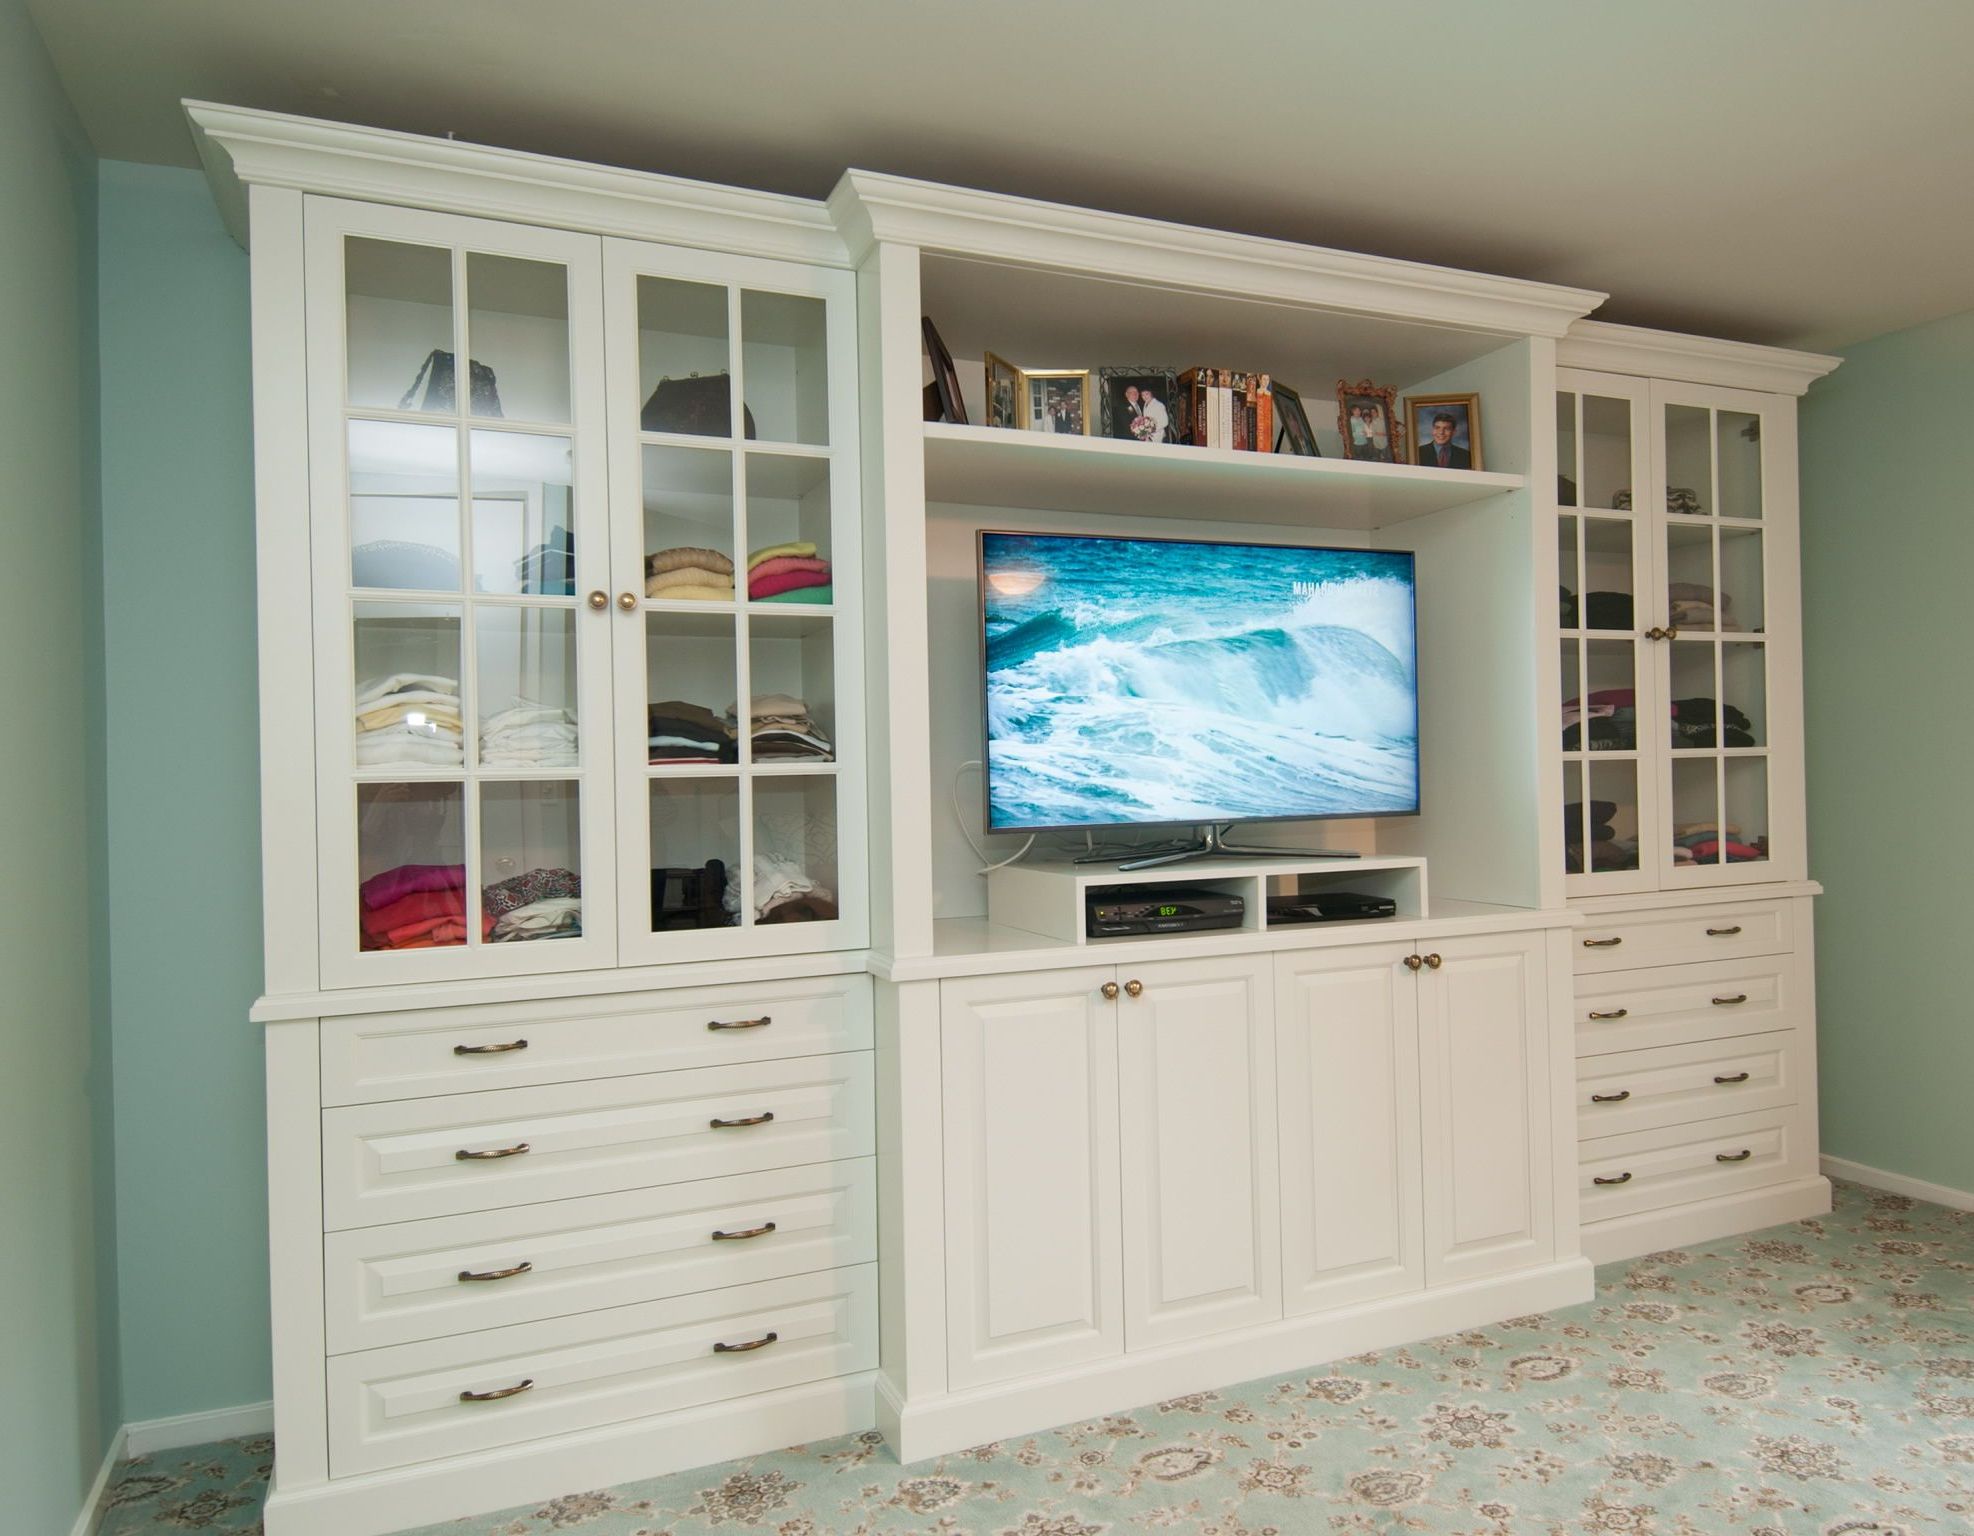 Favorite Dresser And Tv Stands Combination Intended For Tv Stand, Dresser, And Display Shelves Combination Creates Elegant (View 4 of 20)